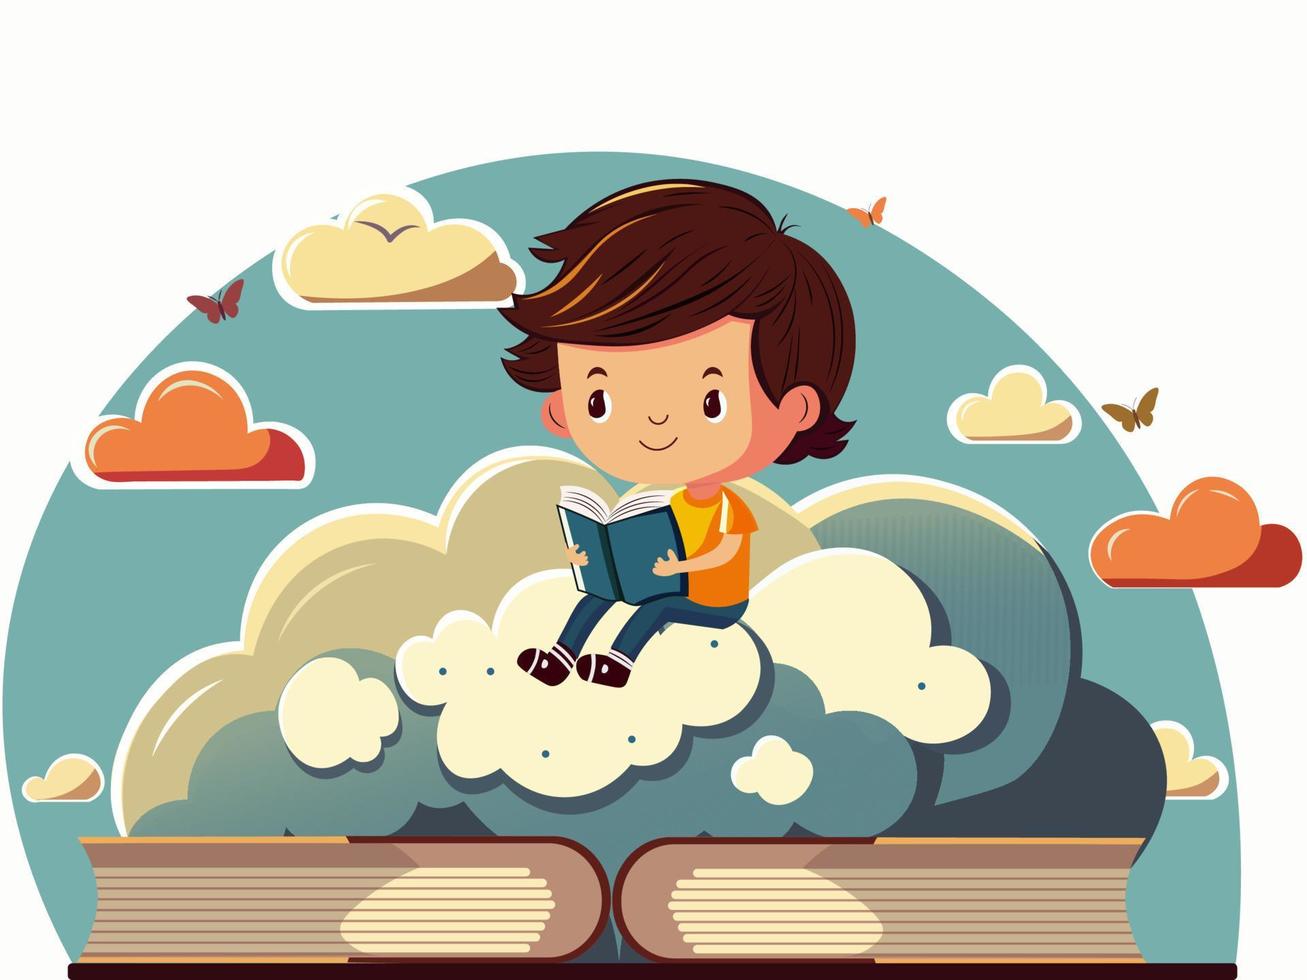 Cute Boy Character Reading Book On Clouds Background With Butterflies. vector